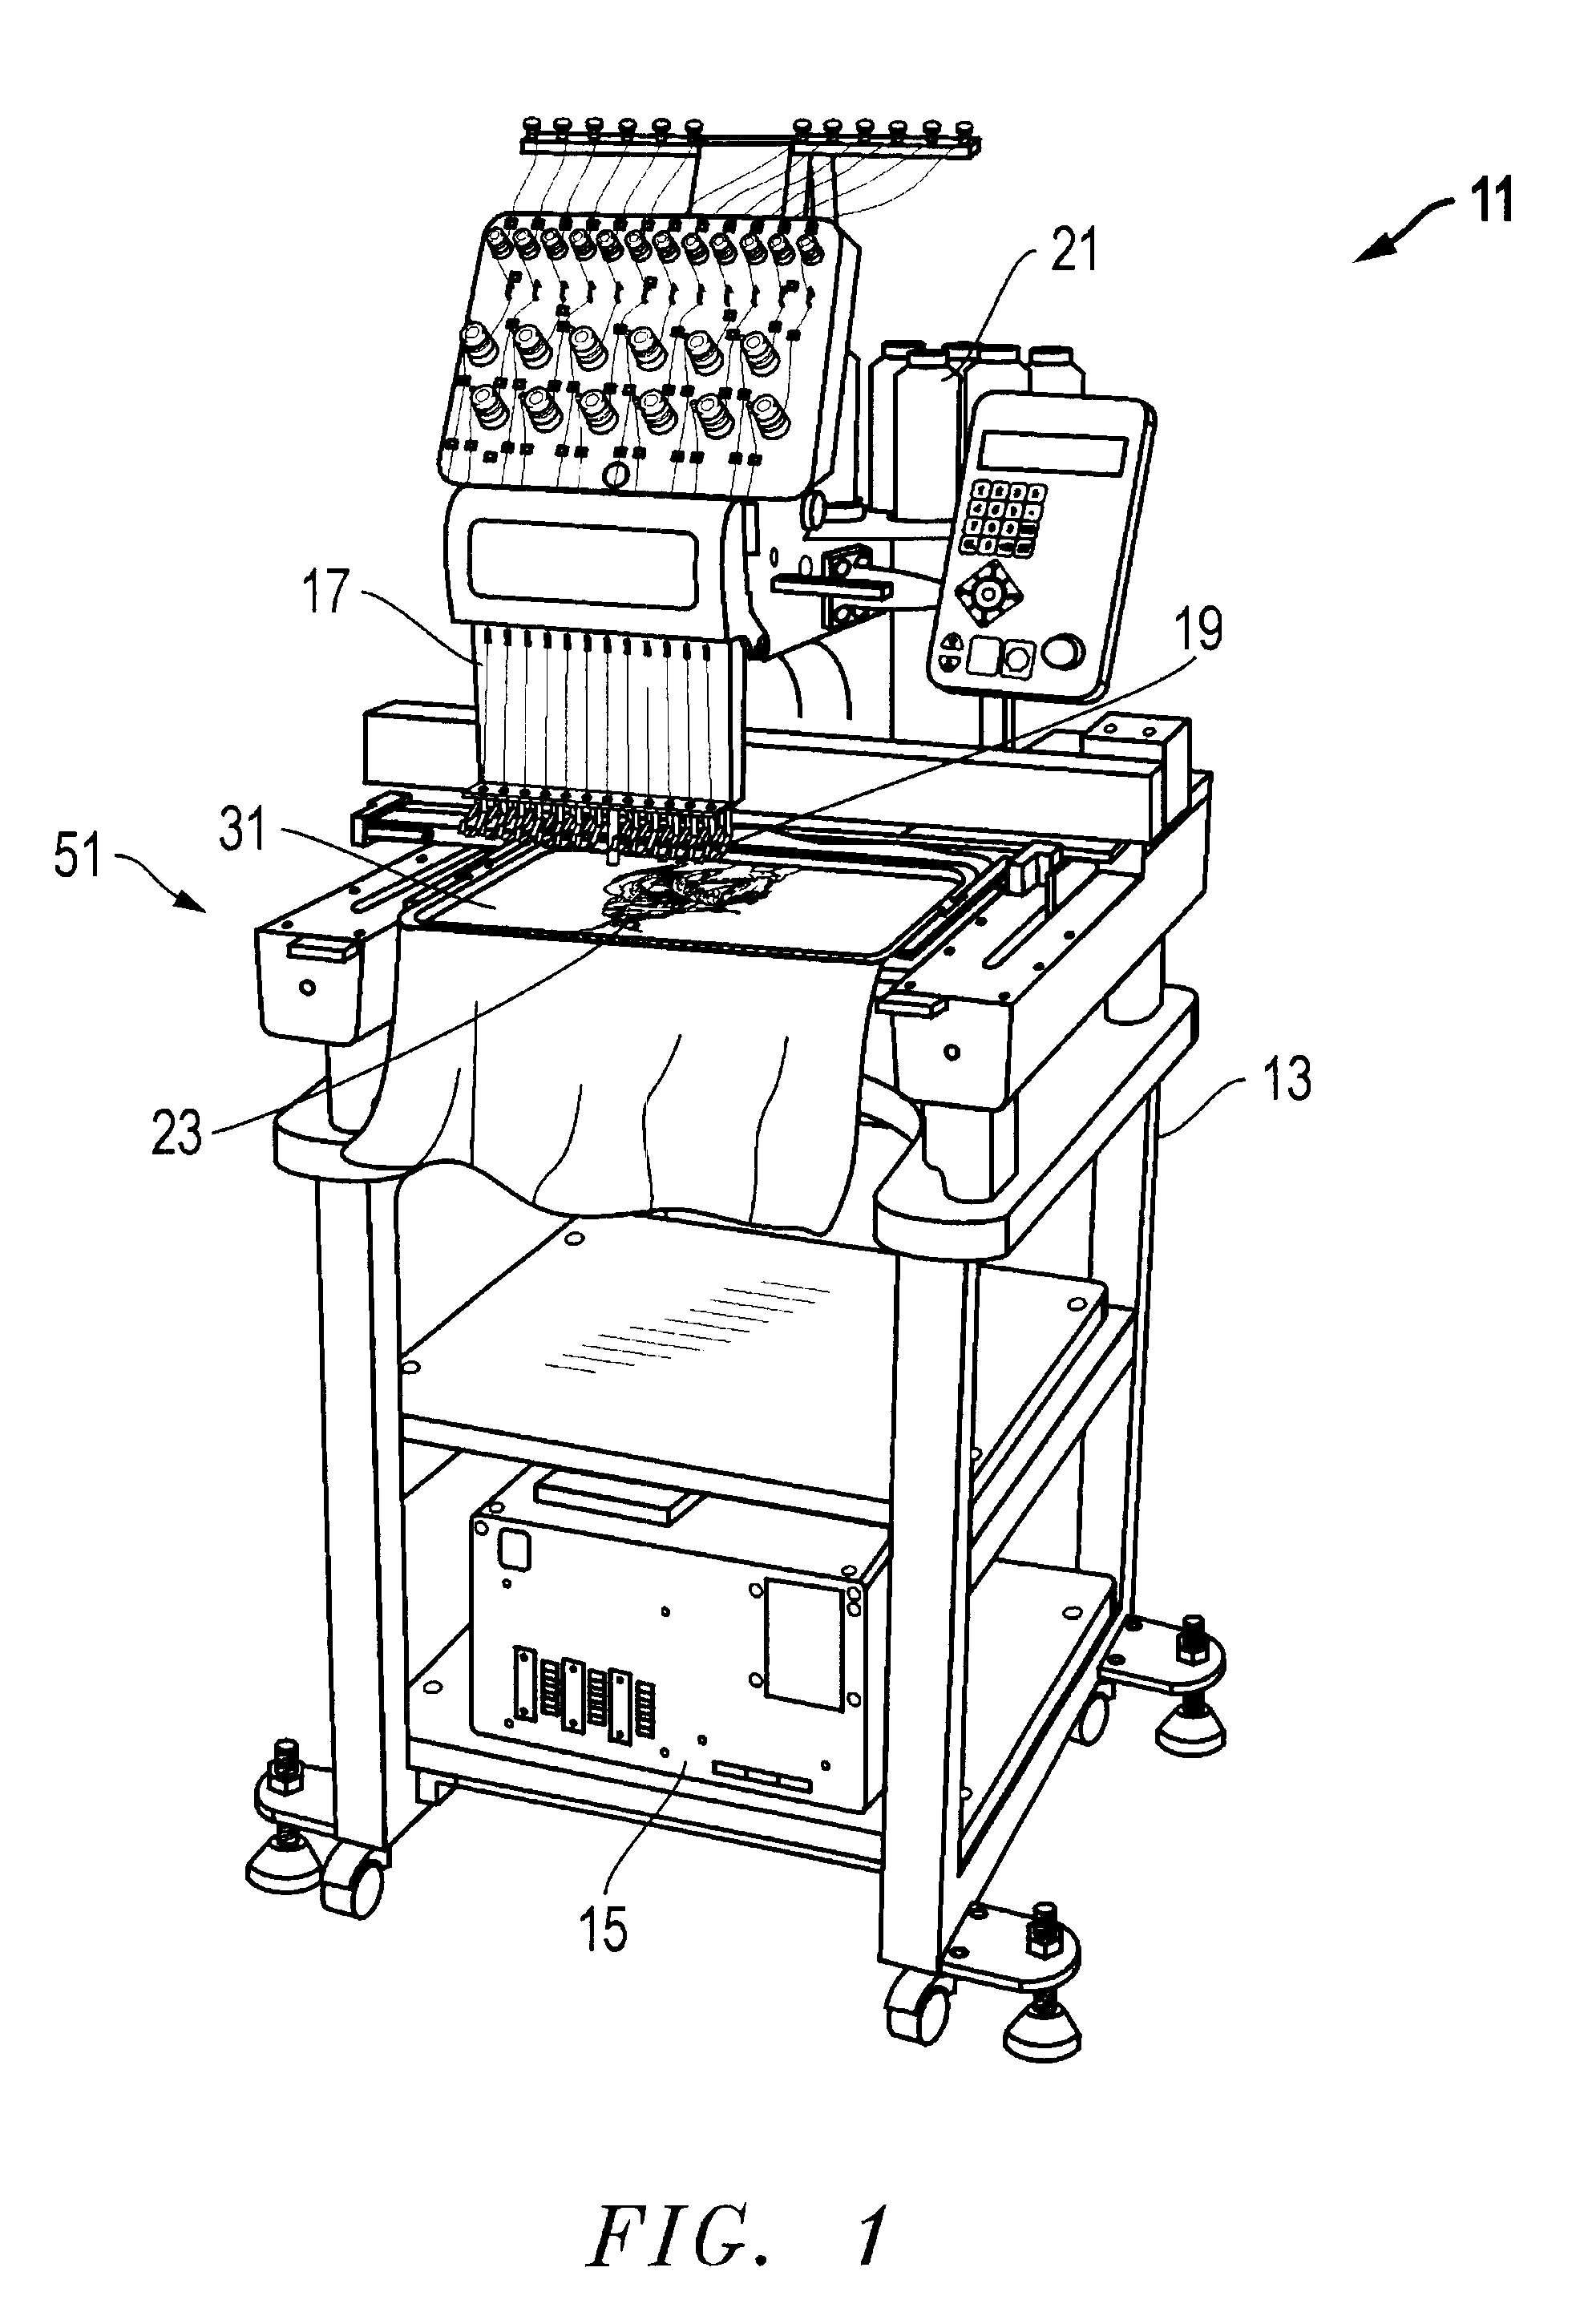 Apparatus, system, and method for adapting a cap frame sash to be quickly mounted to and dismounted from a tubular frame sash on an automatic embroidery machine